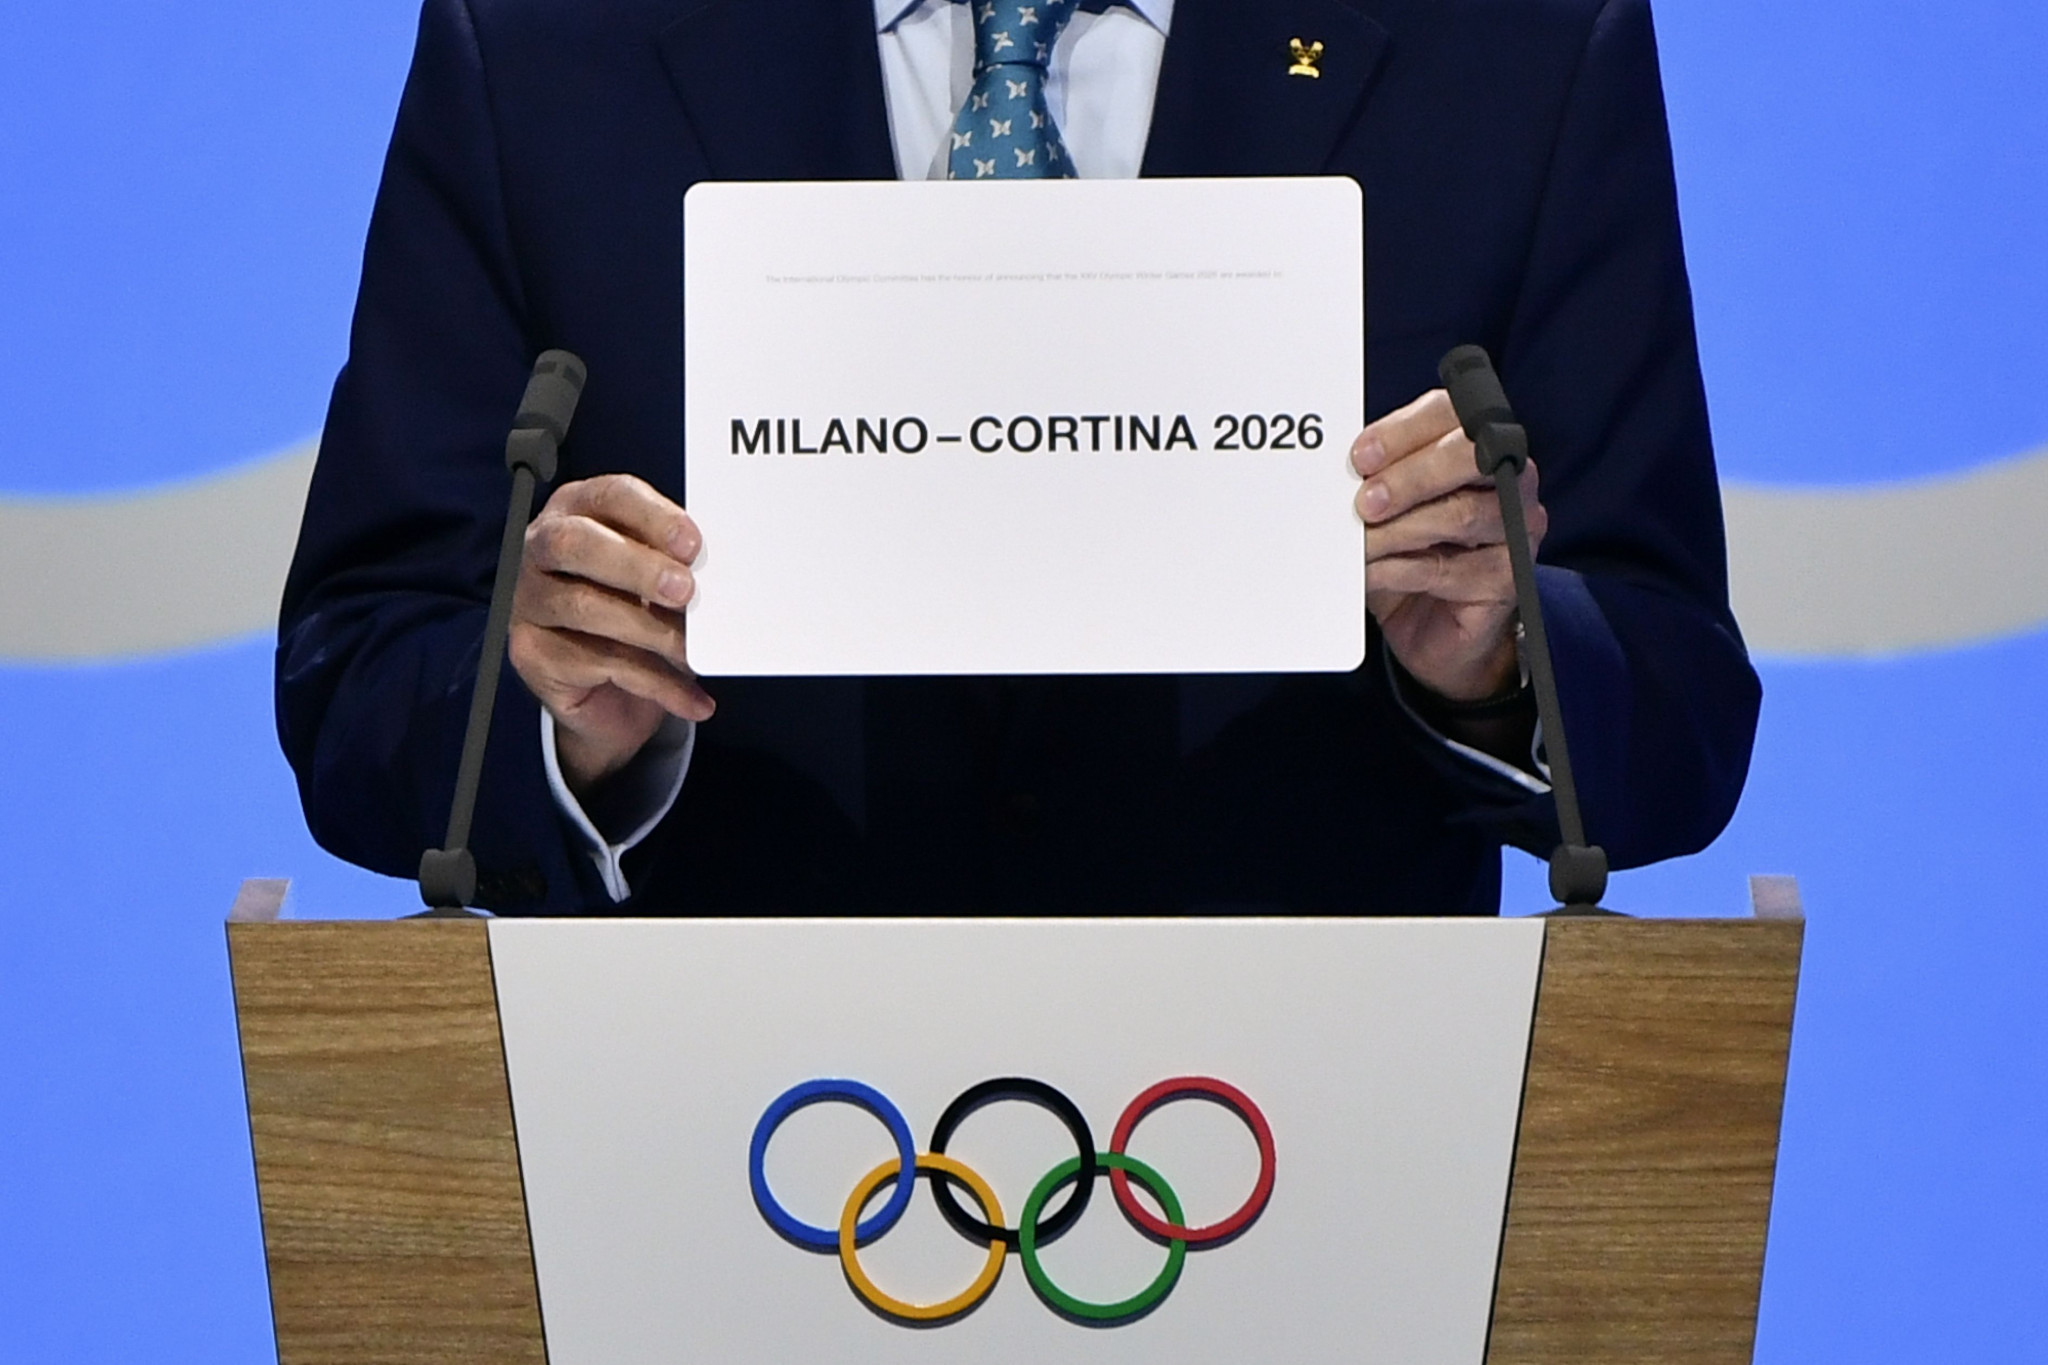 Milan moved up the rankings, prior to hosting the Milan Cortina 2026 Winter Olympics ©Getty Images